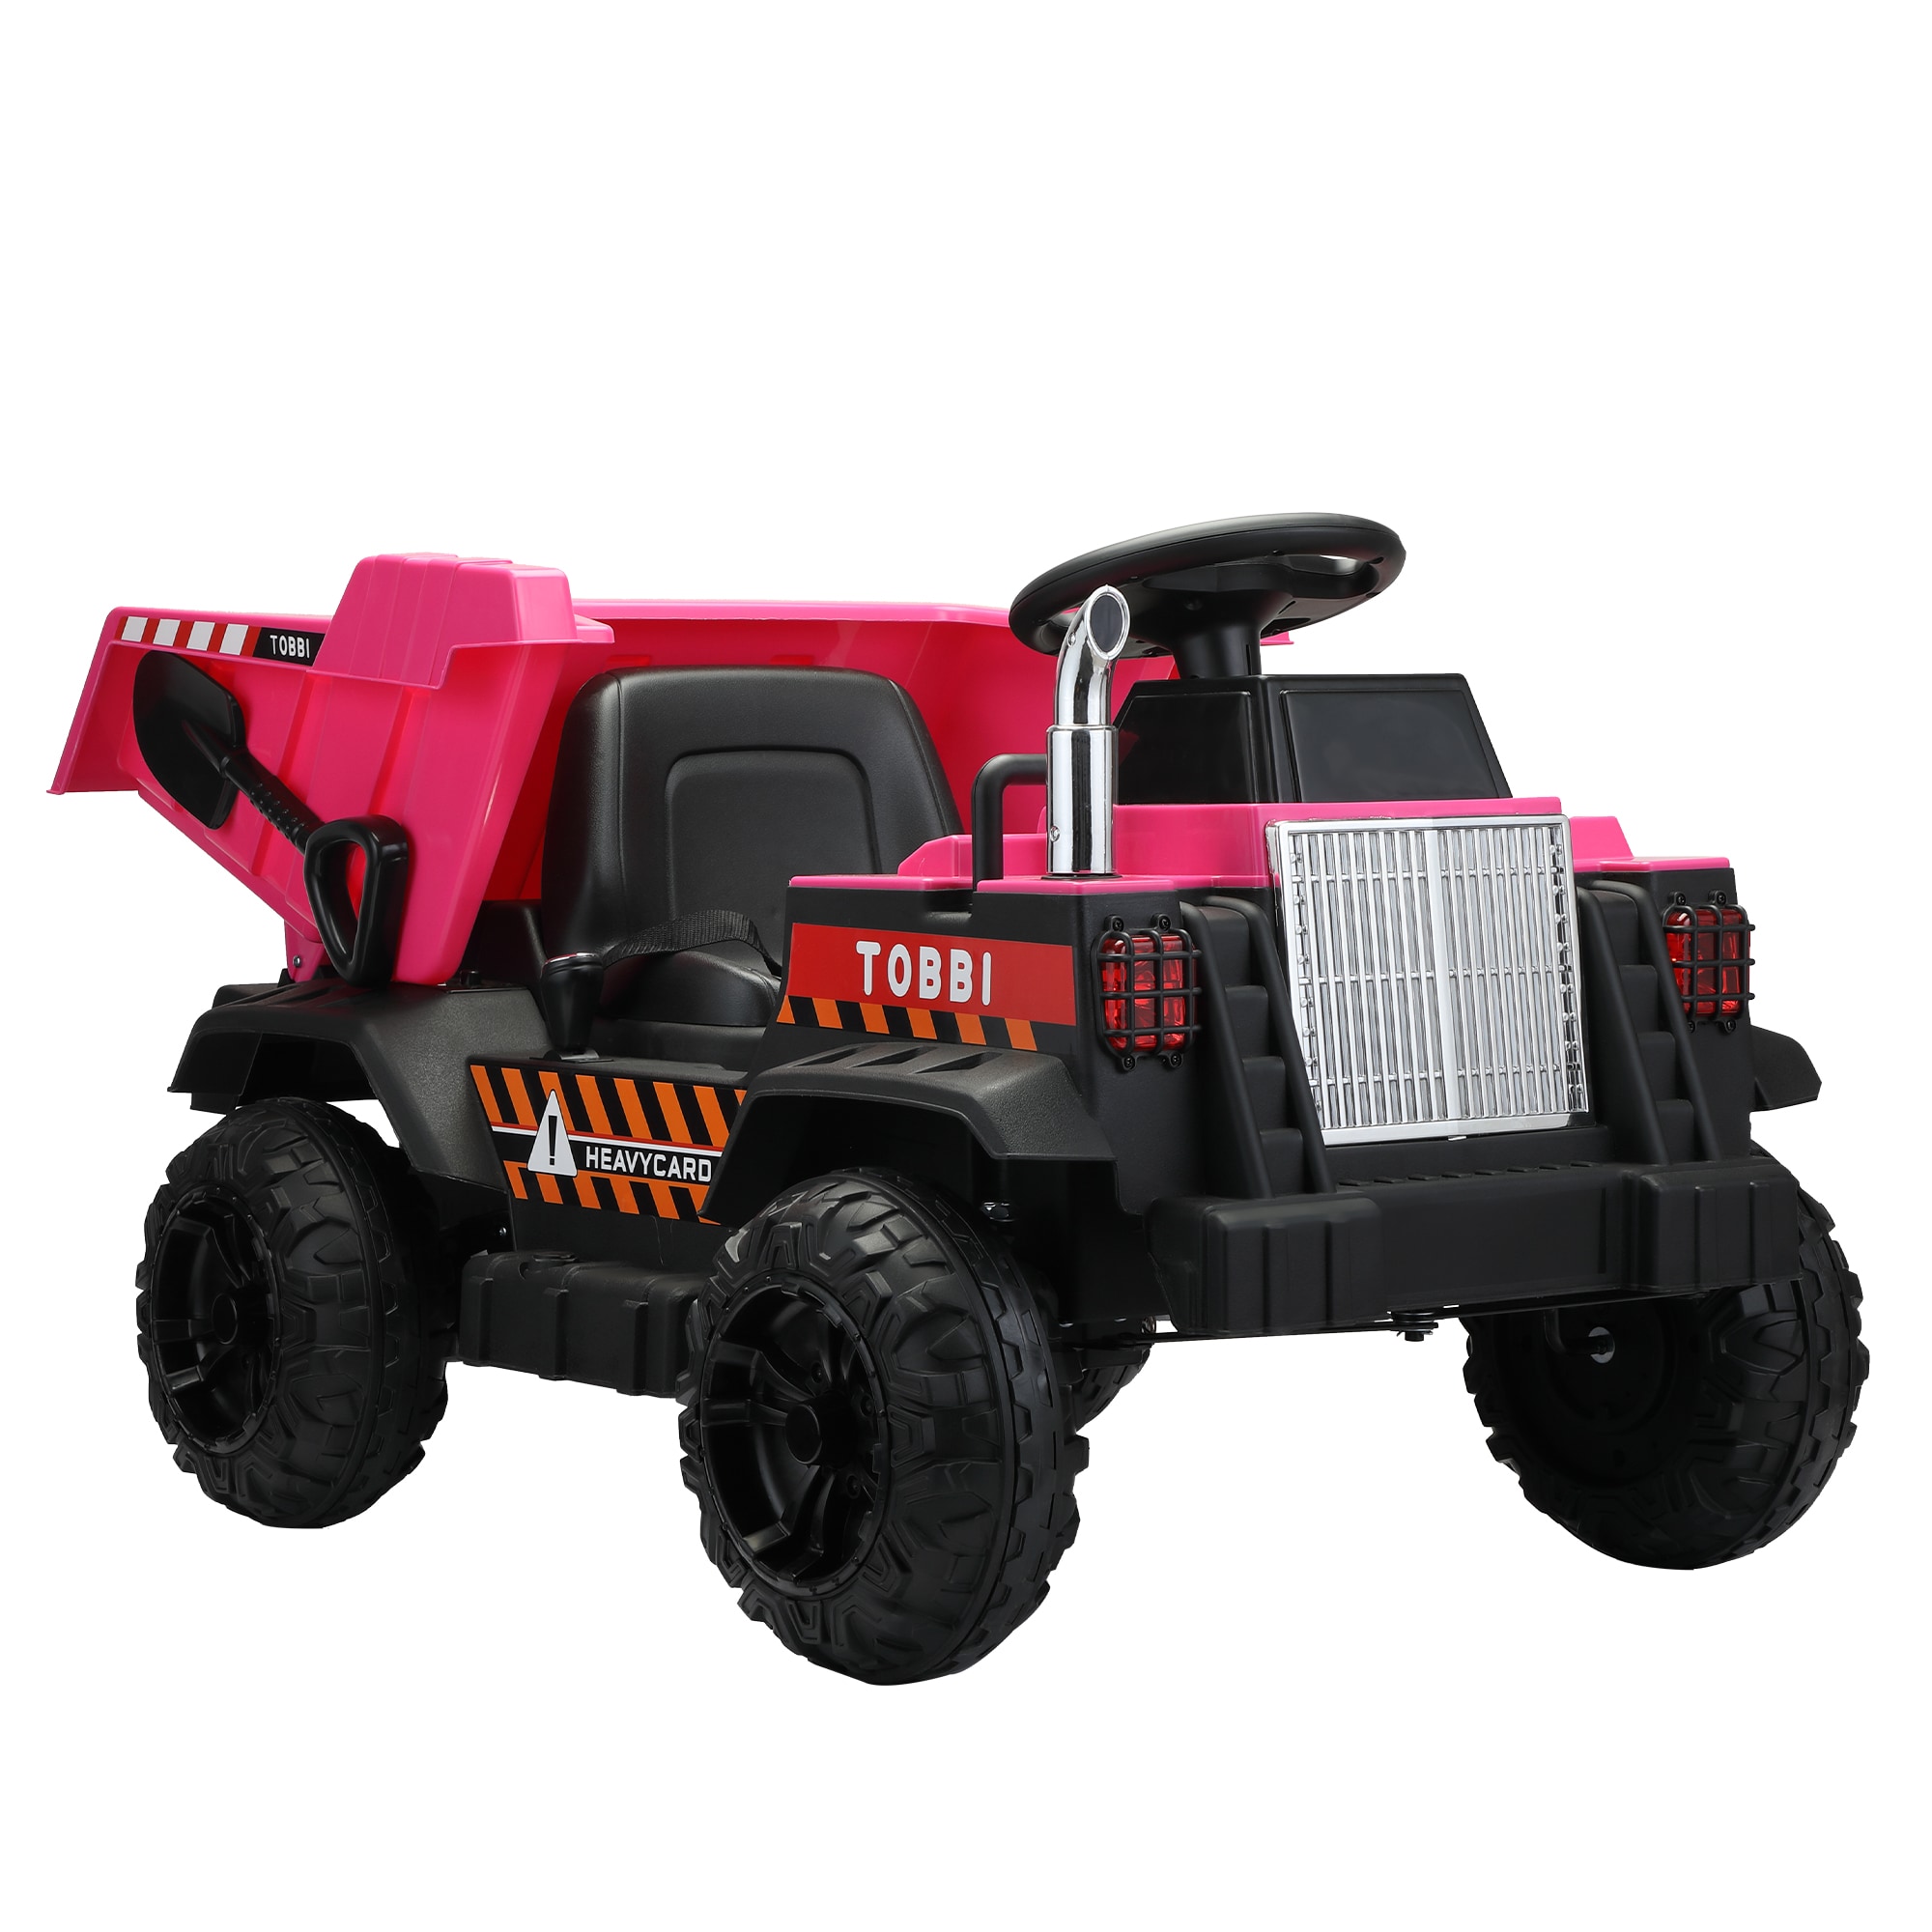 KIDS RIDE ON TIPPING DUMPER TRUCK TRACTOR ELECTRIC CHILDRENS 12V BATTERY TOY CAR 